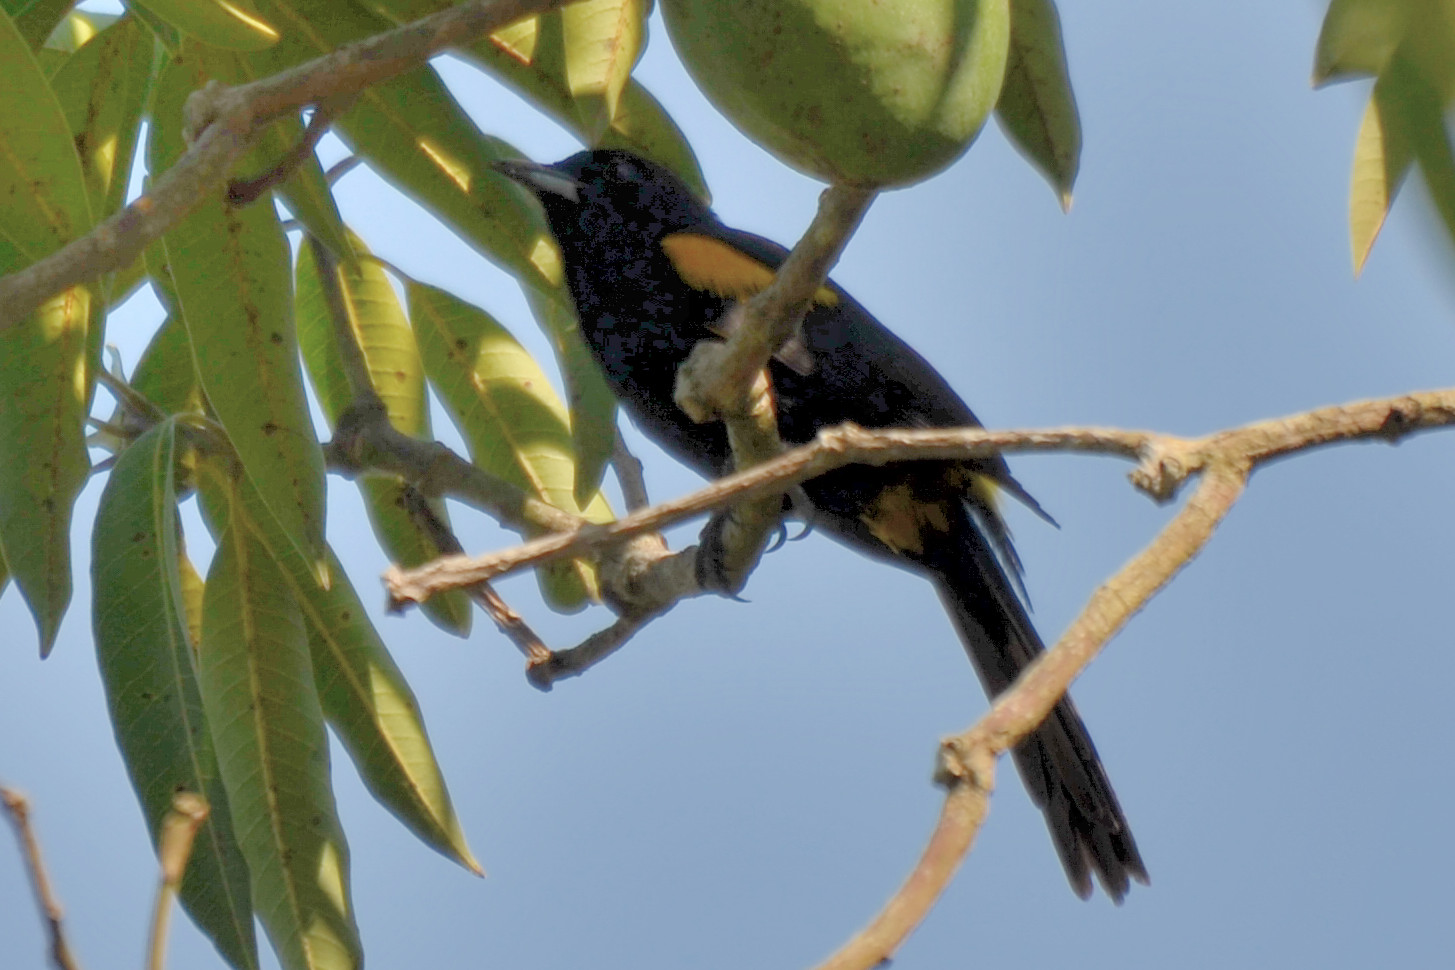 Click picture to see more  Cuban Orioles.